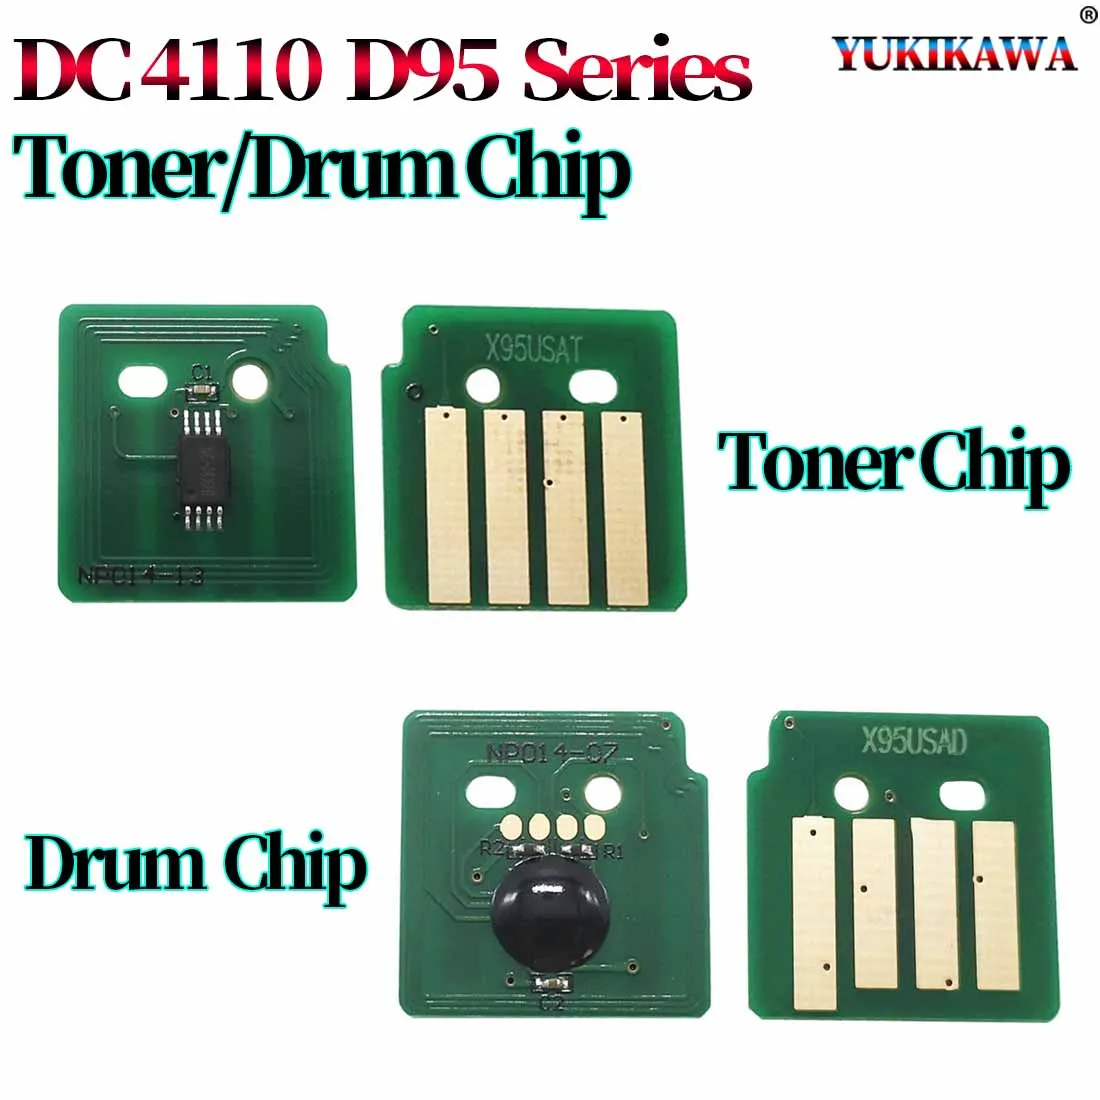 

10X Toner Chip Drum Chip For Use in Xerox DocuCentre 4110 4127 4112 4590 4595 1100 900 9000 D95 D110P D125P D136P